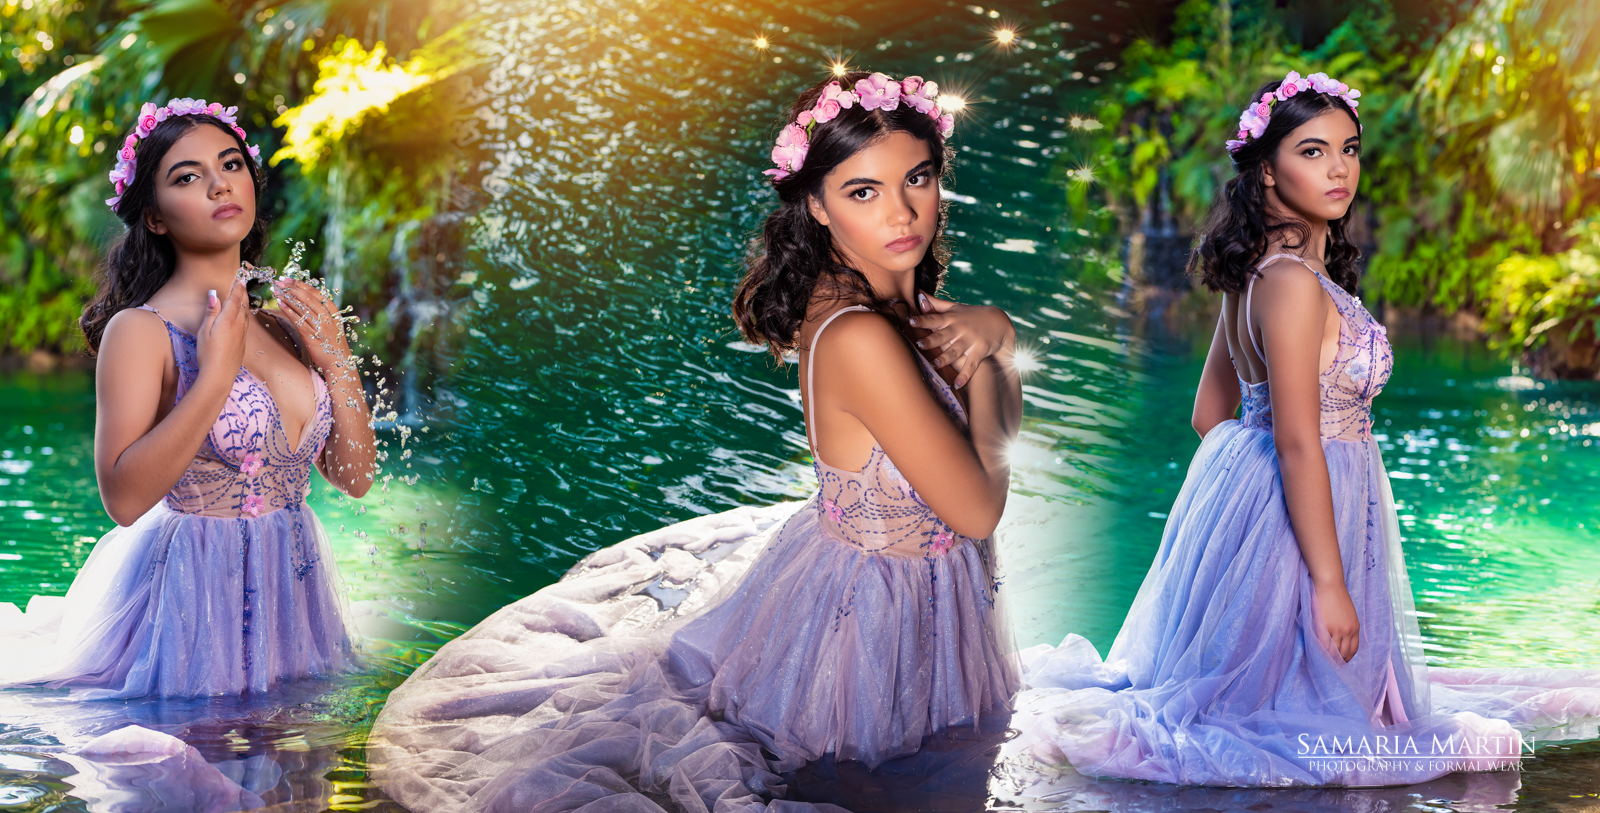 Photoshoot with flowers, photoshoot in a lake, best quinceañera dressed, best Water Dresses, Samaria Martin photography (1)